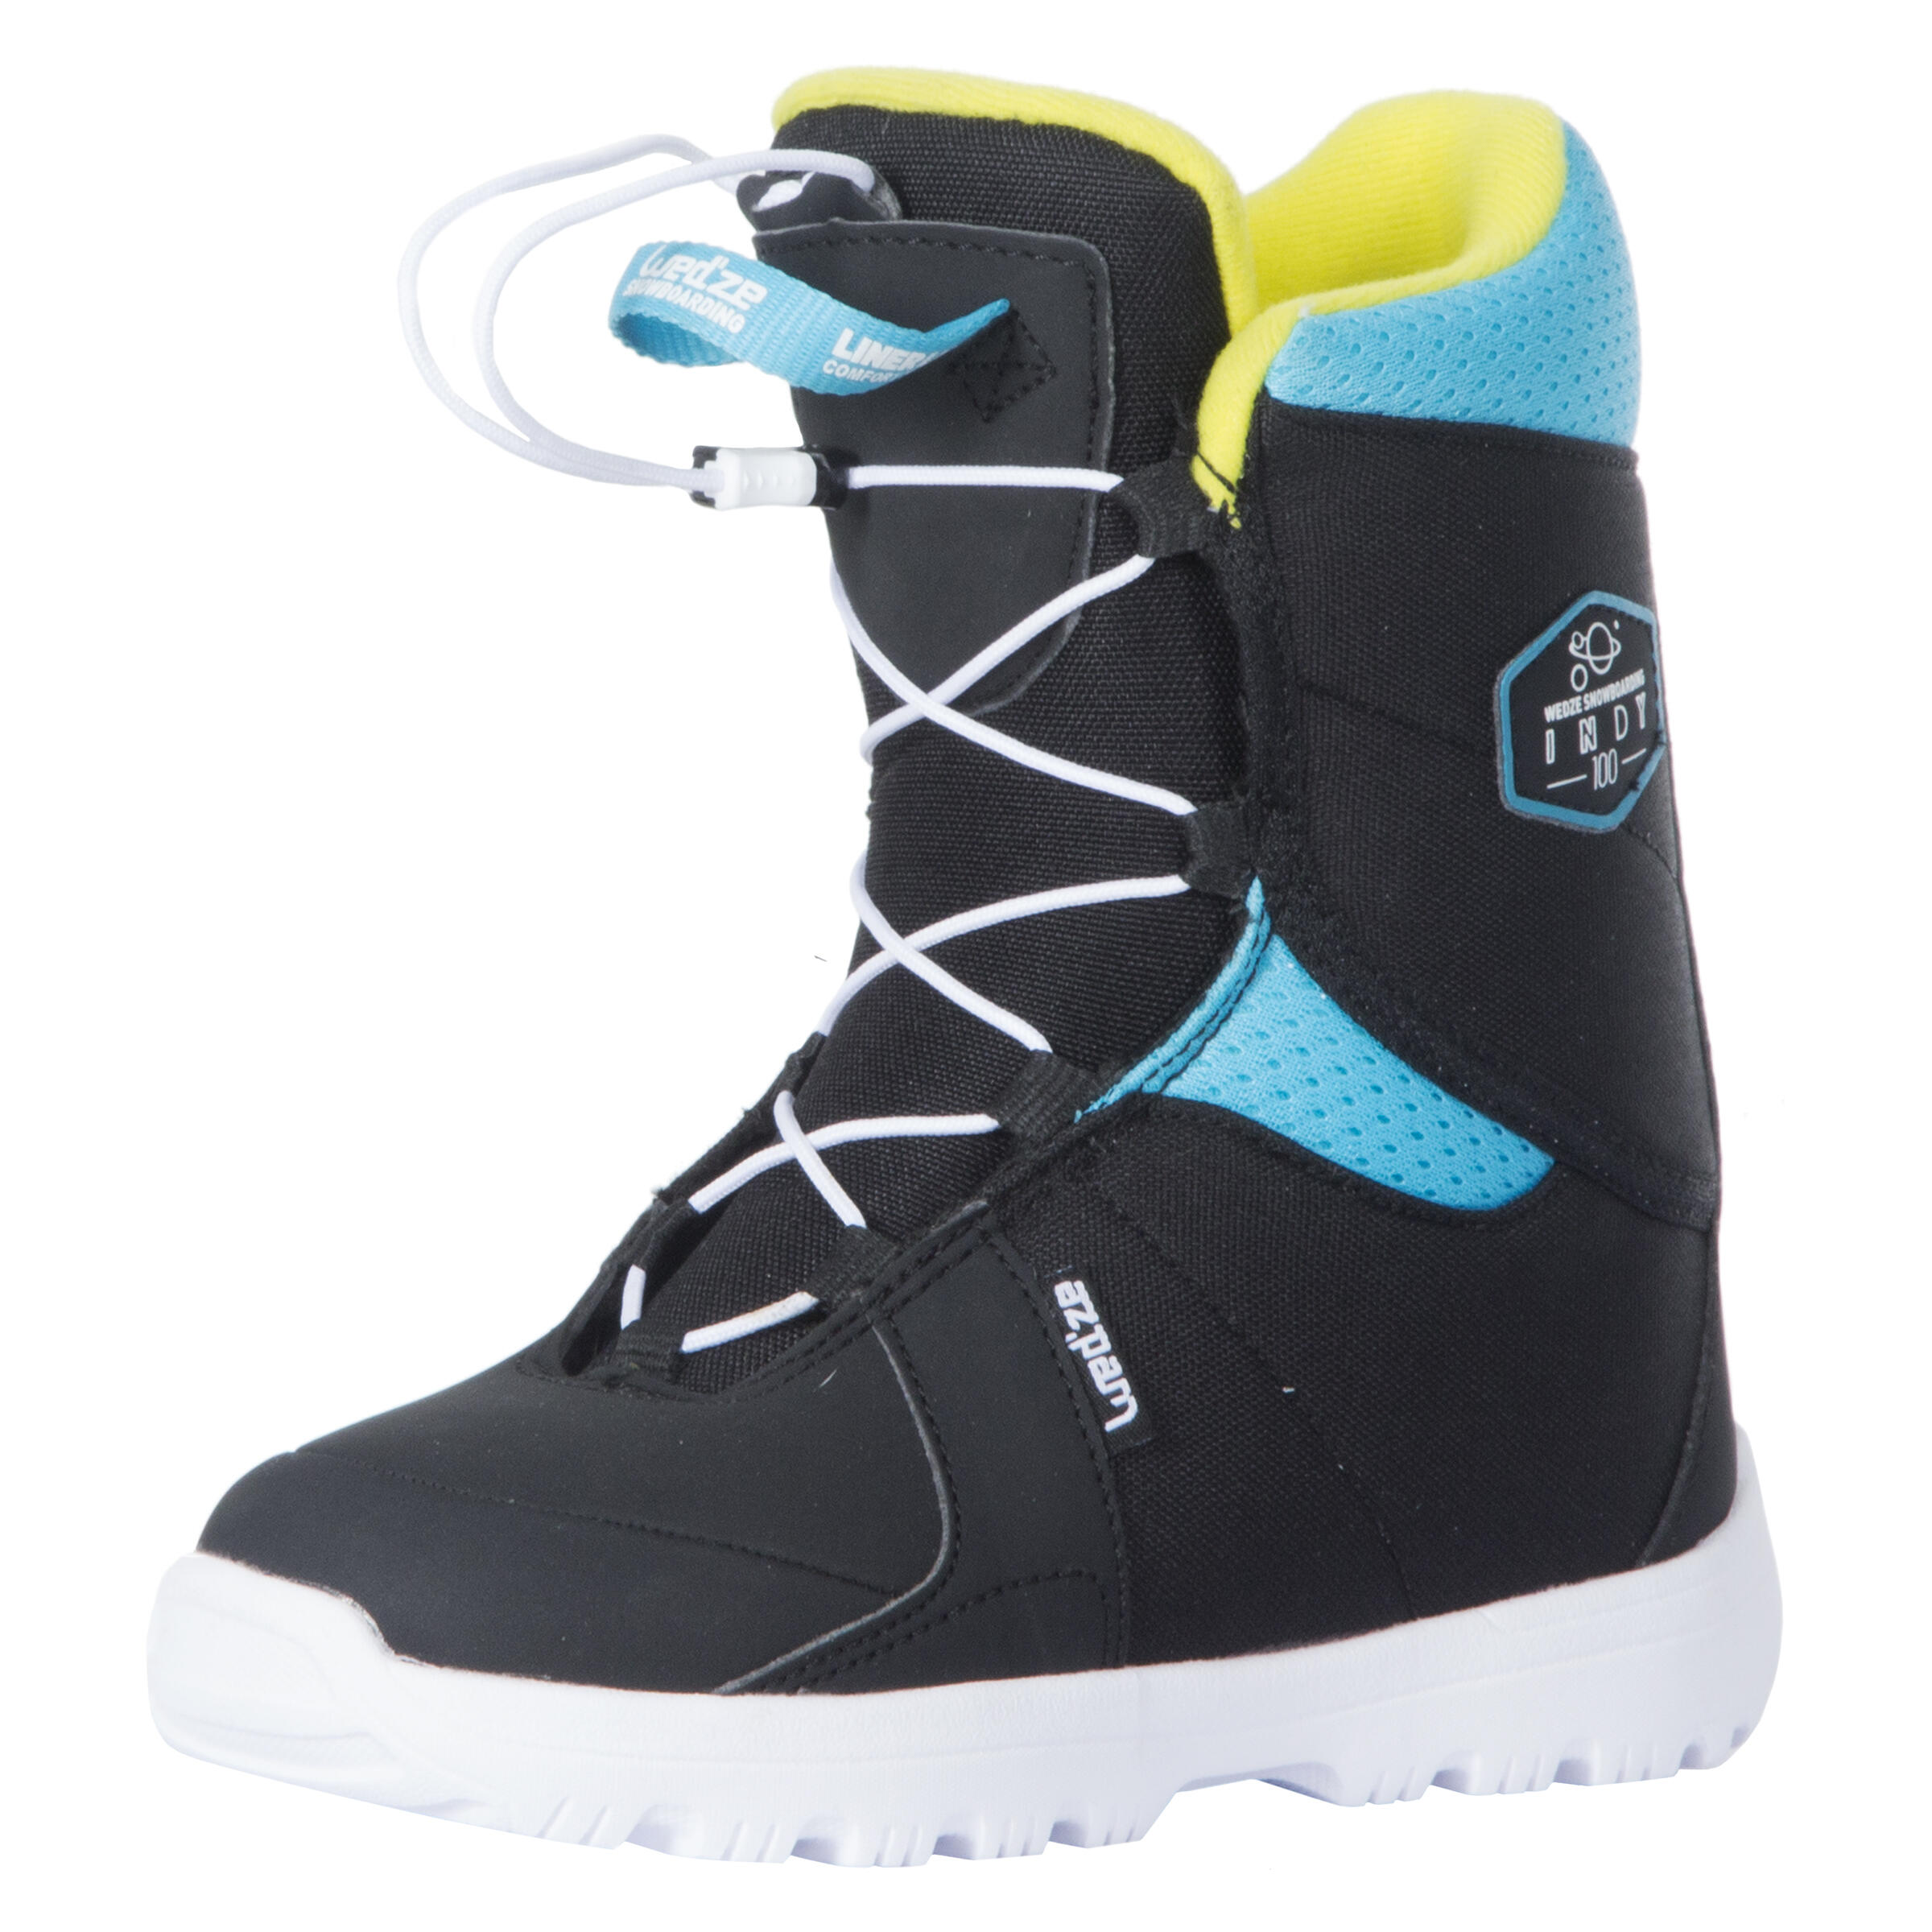 Boots snowboard all mountain/freestyle Indy 100 Copii decathlon.ro imagine noua